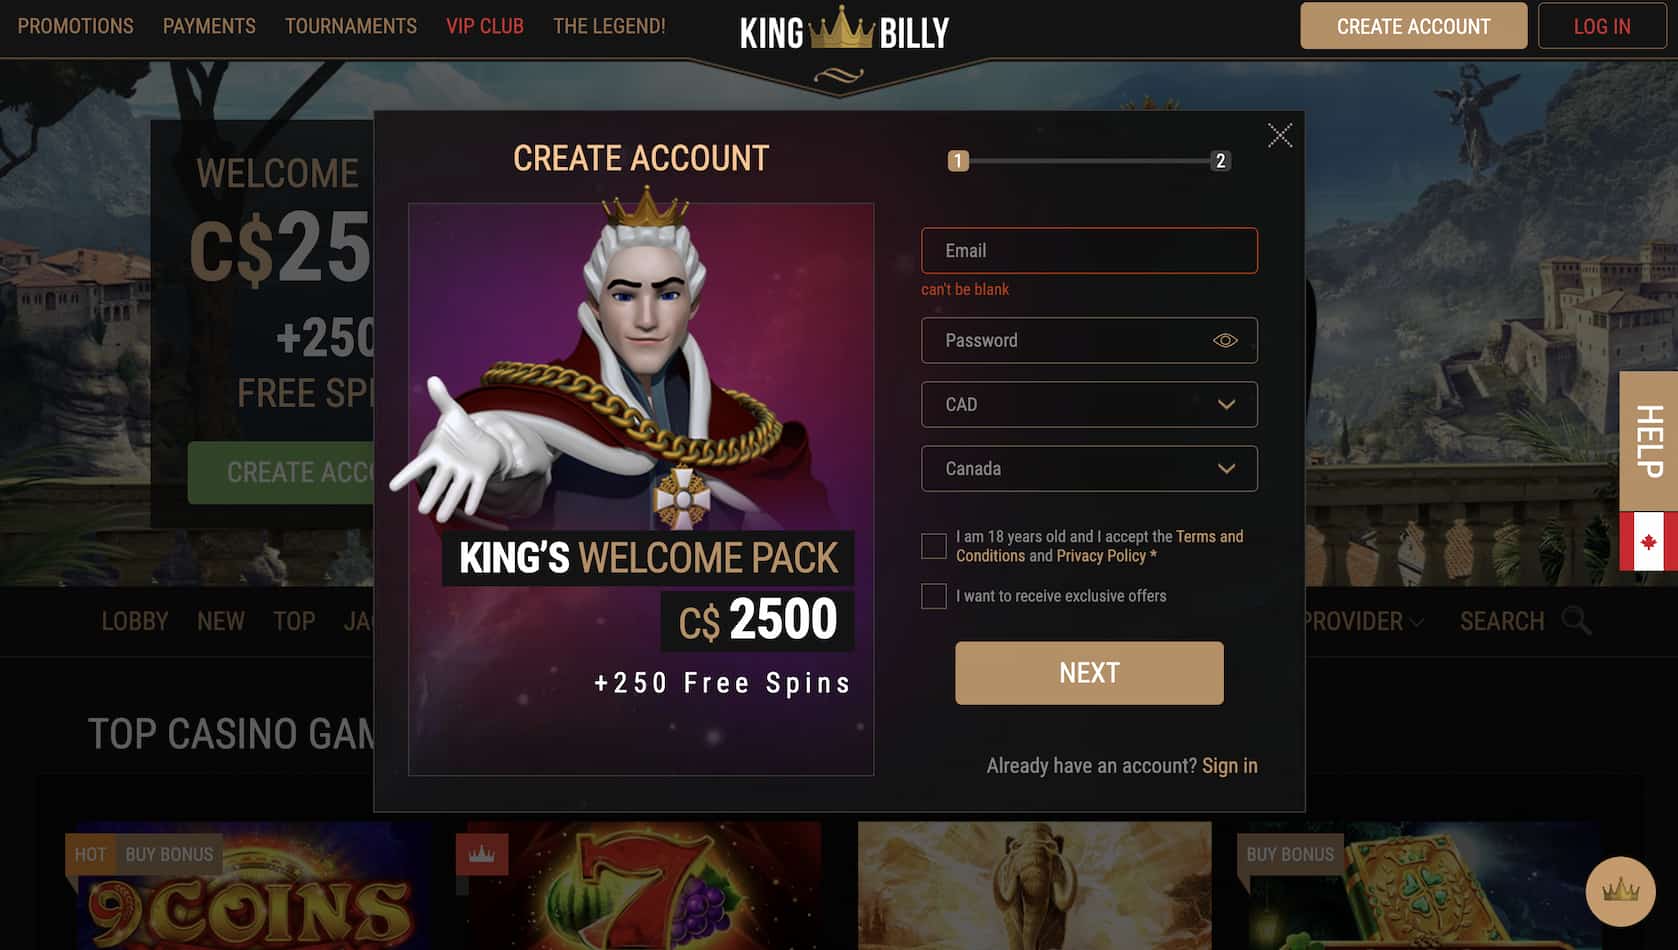 king billy sign up